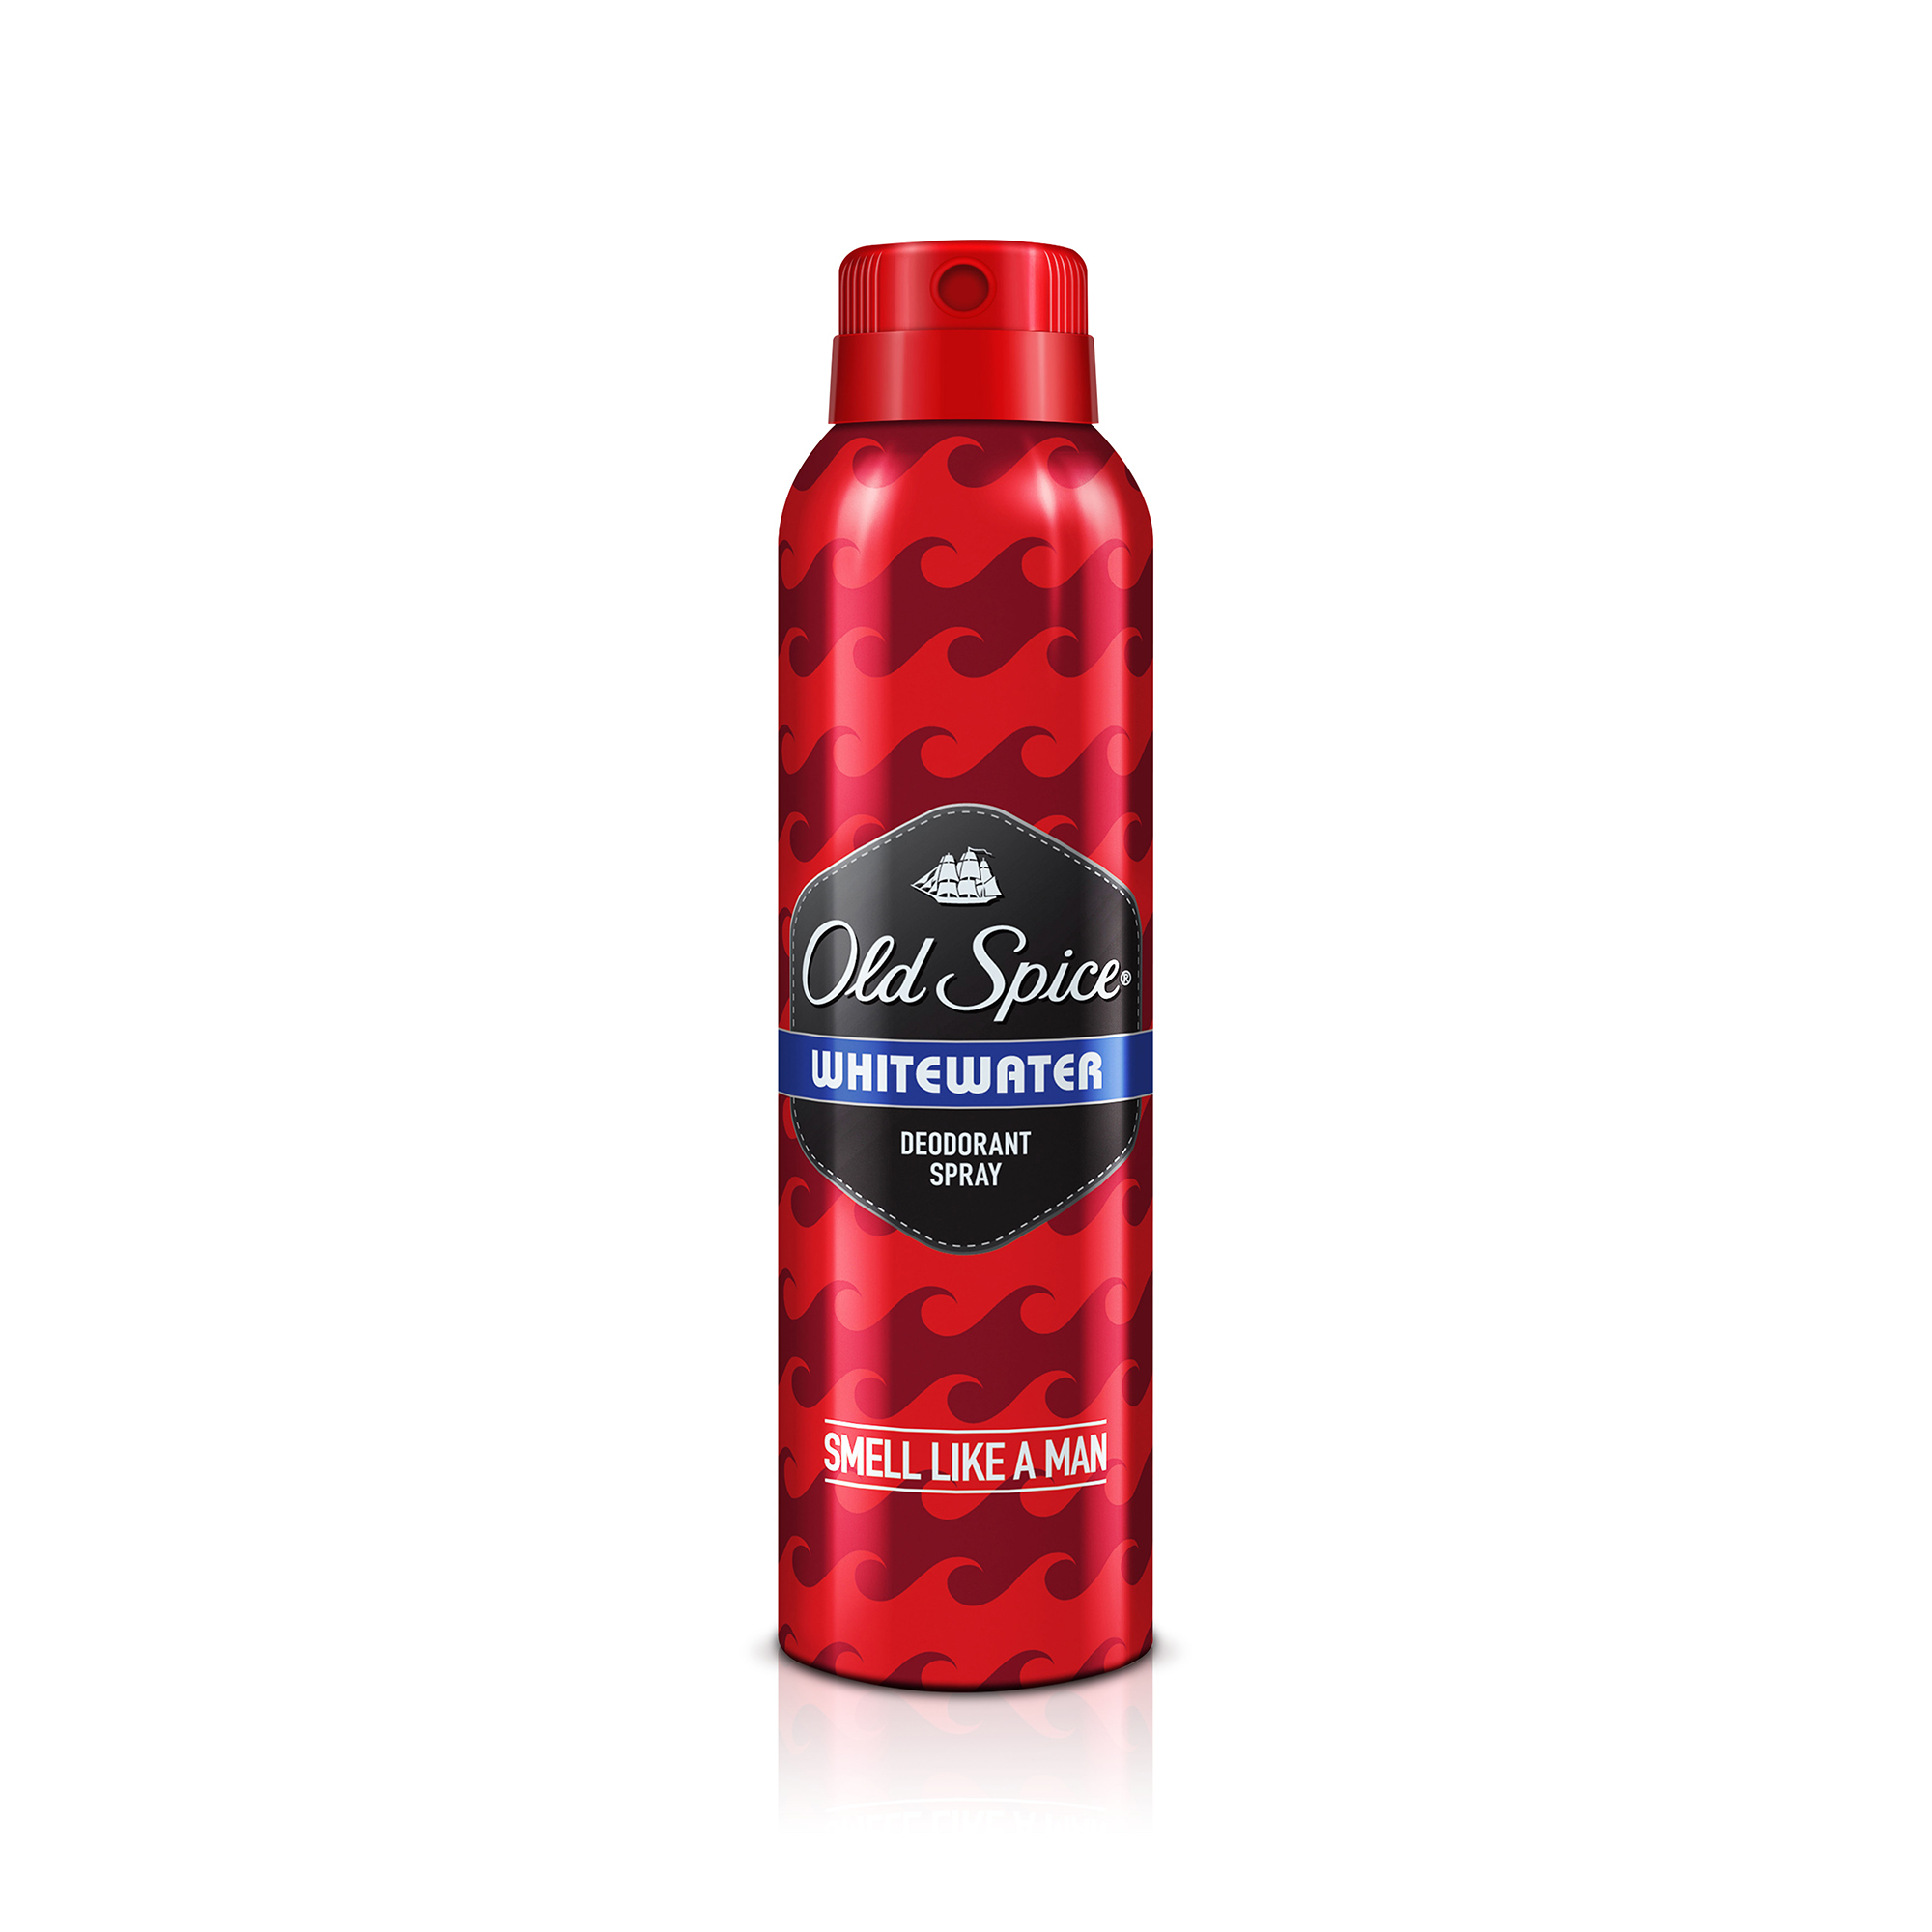 Old Spice Original Deodorant Personal Grooming Thank You Gift Set for Men